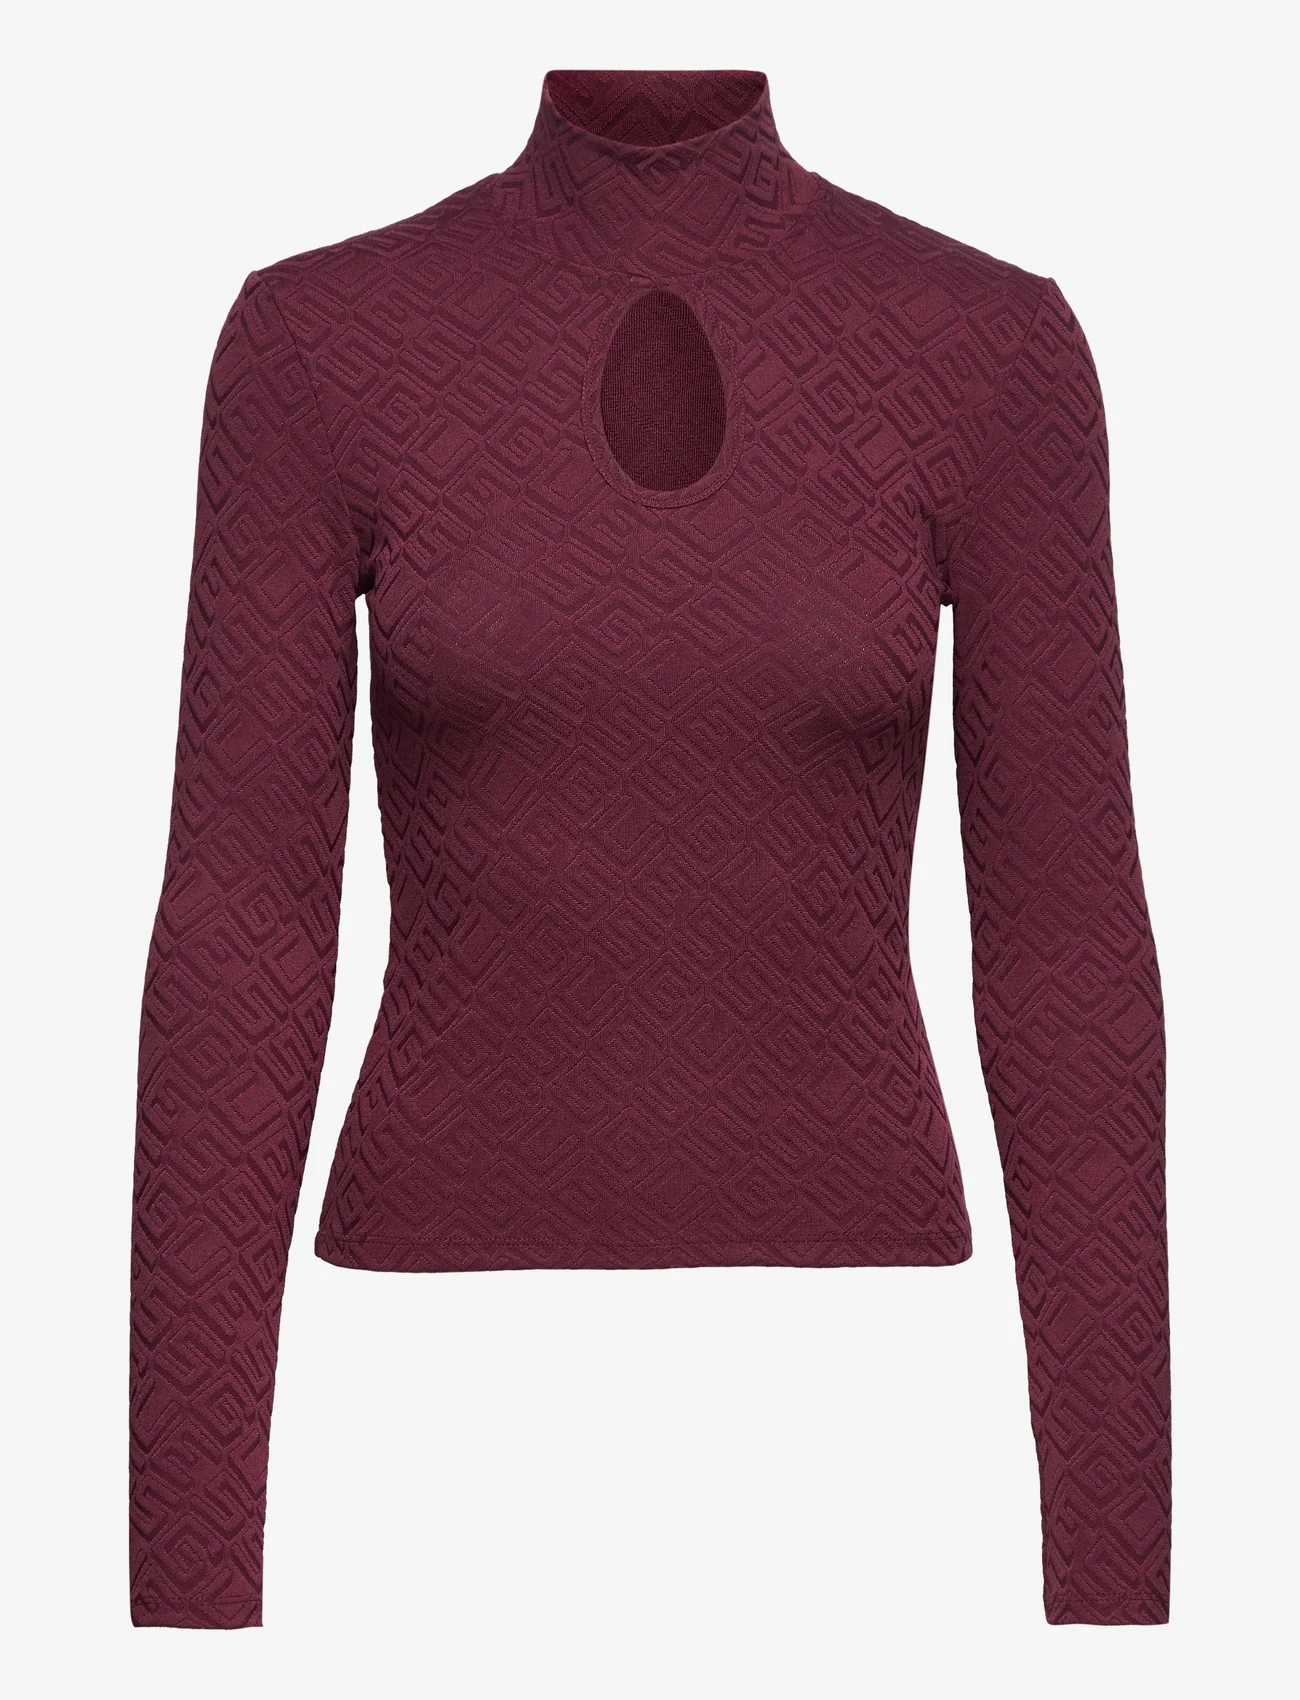 GUESS Jeans - LS CLIO TOP - pullover - mystic wine - 0